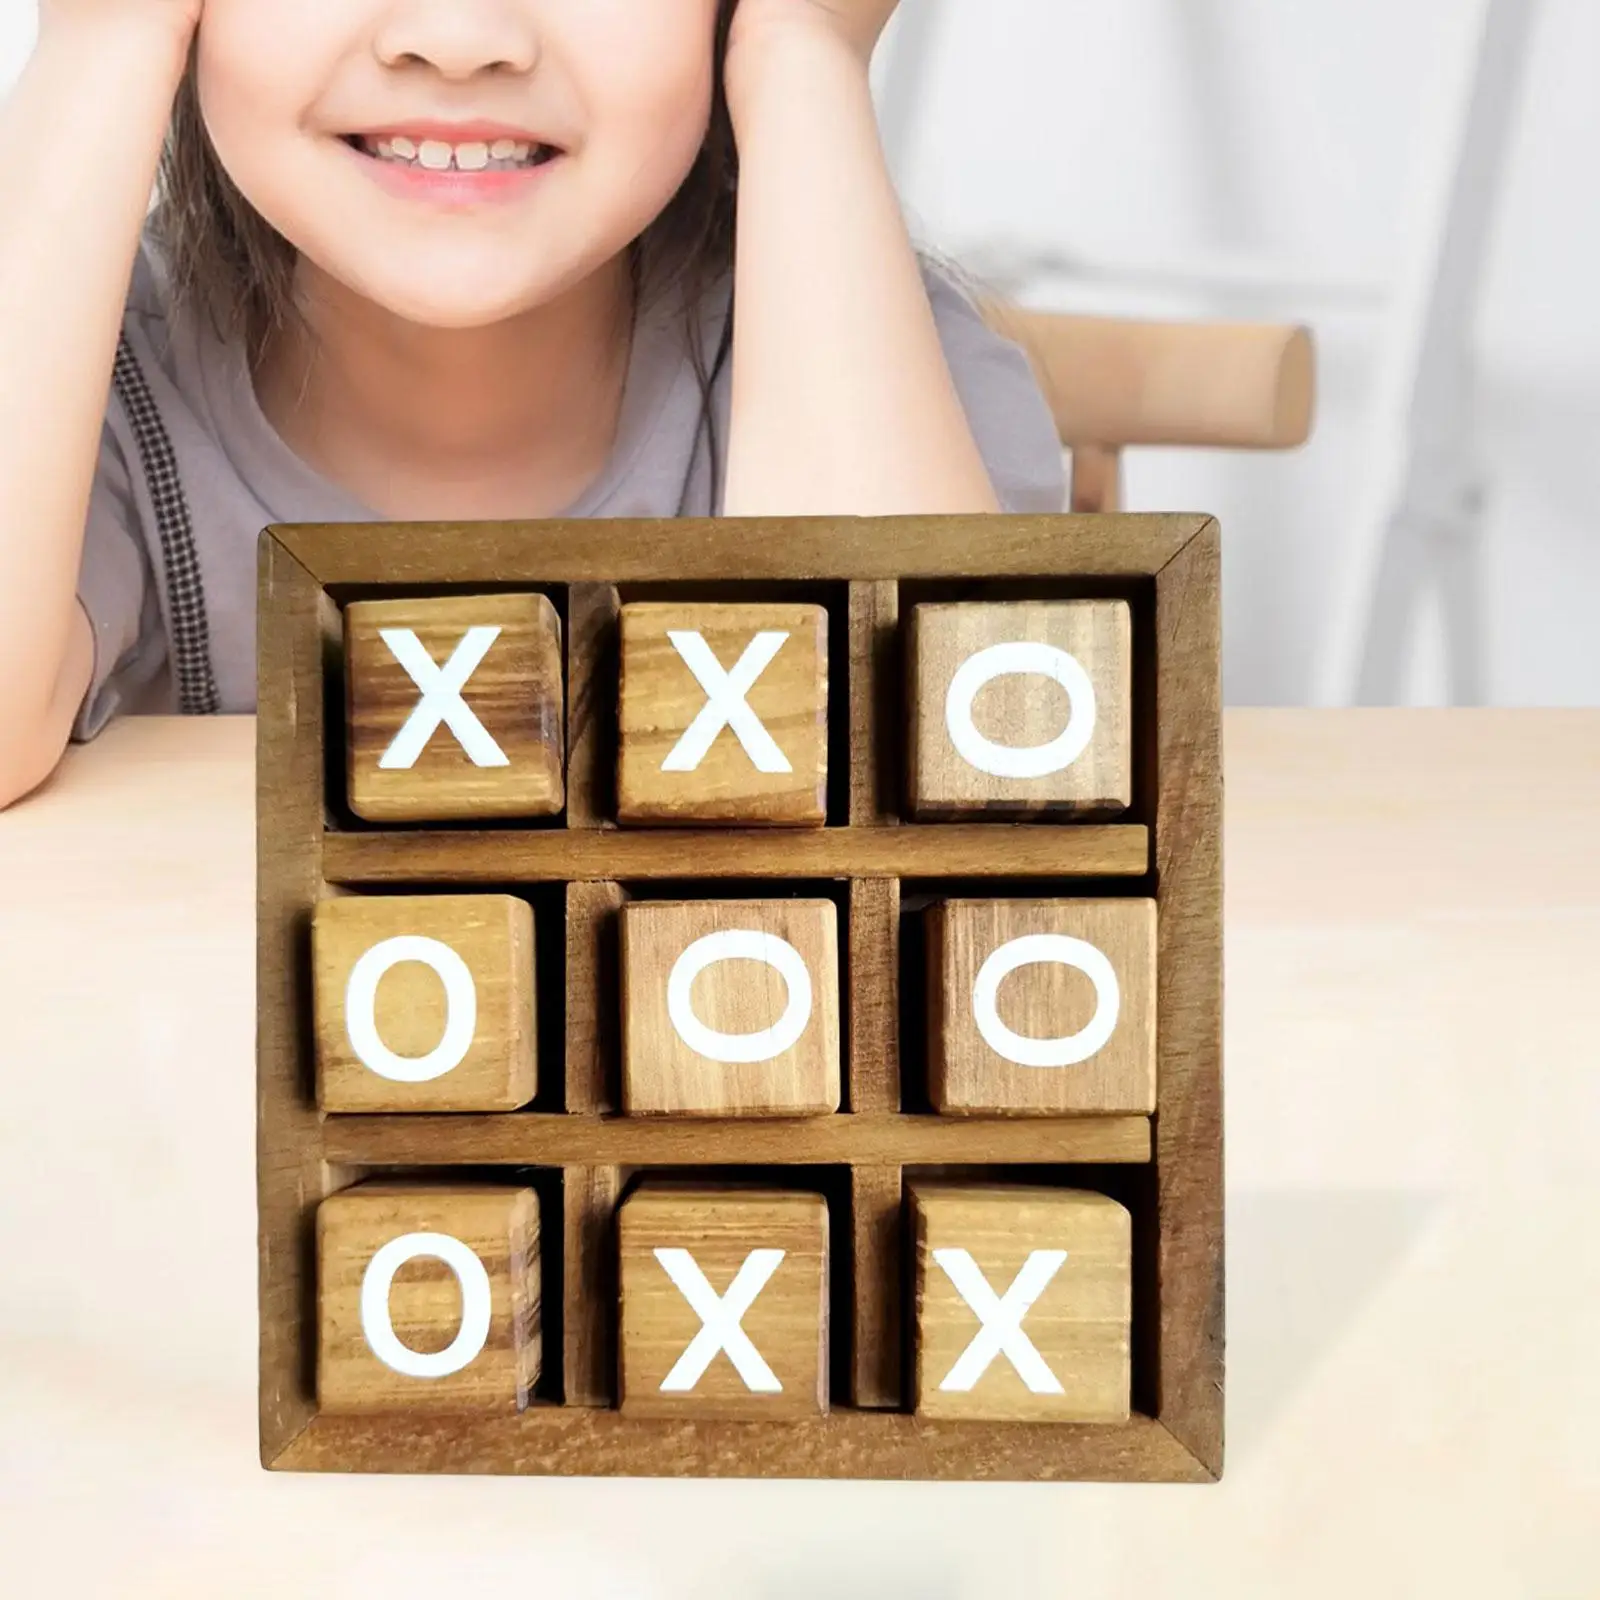 Wooden Tic TAC Toe Game Board Games Party Favor Fun Indoor Brain Teaser Travel for Family Friends Top Room